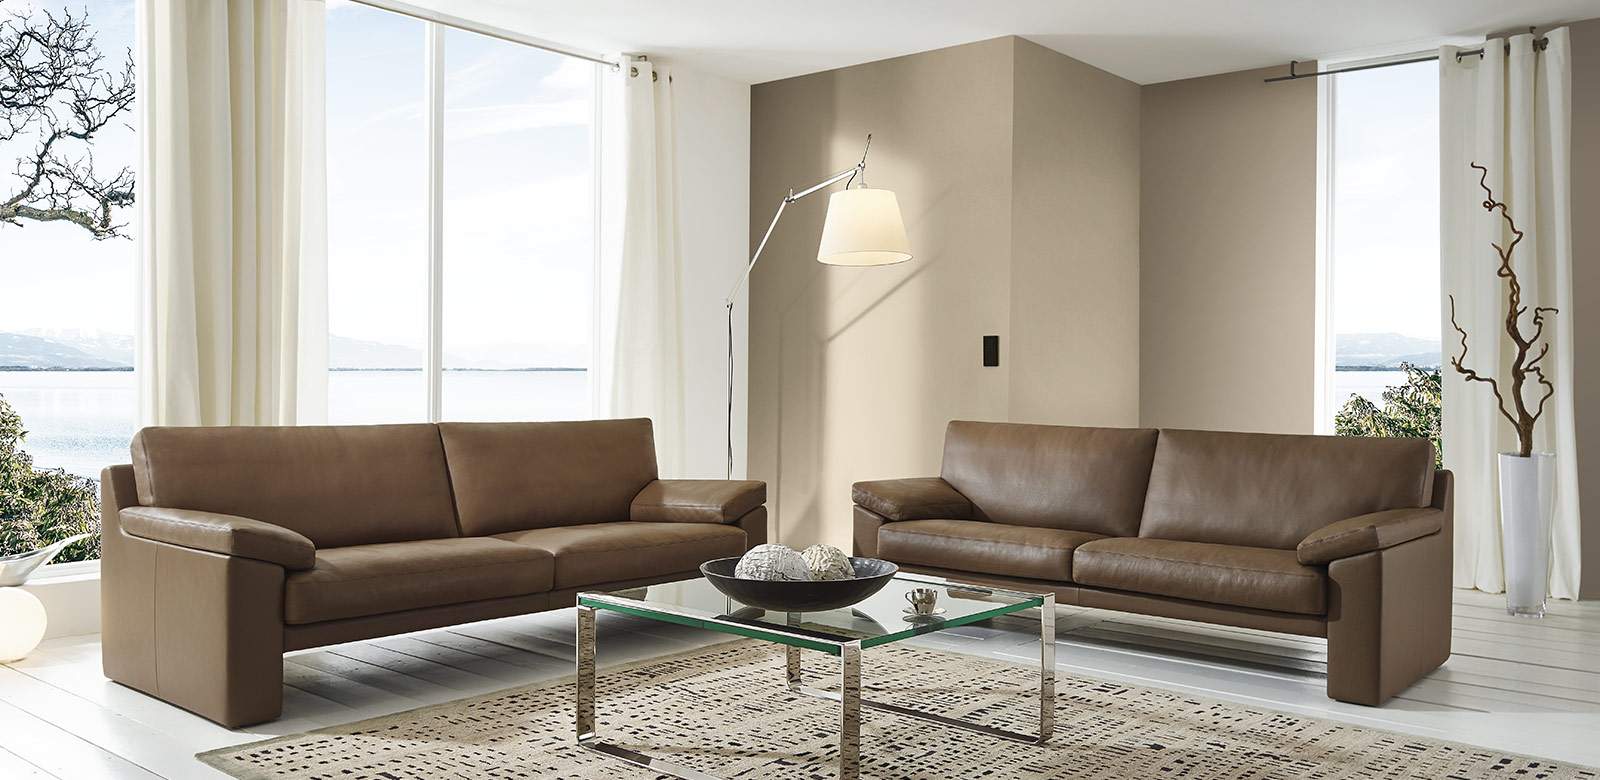 CL600 Brown Leather Sofas with Glass Table in Modern Living Room by the Lake